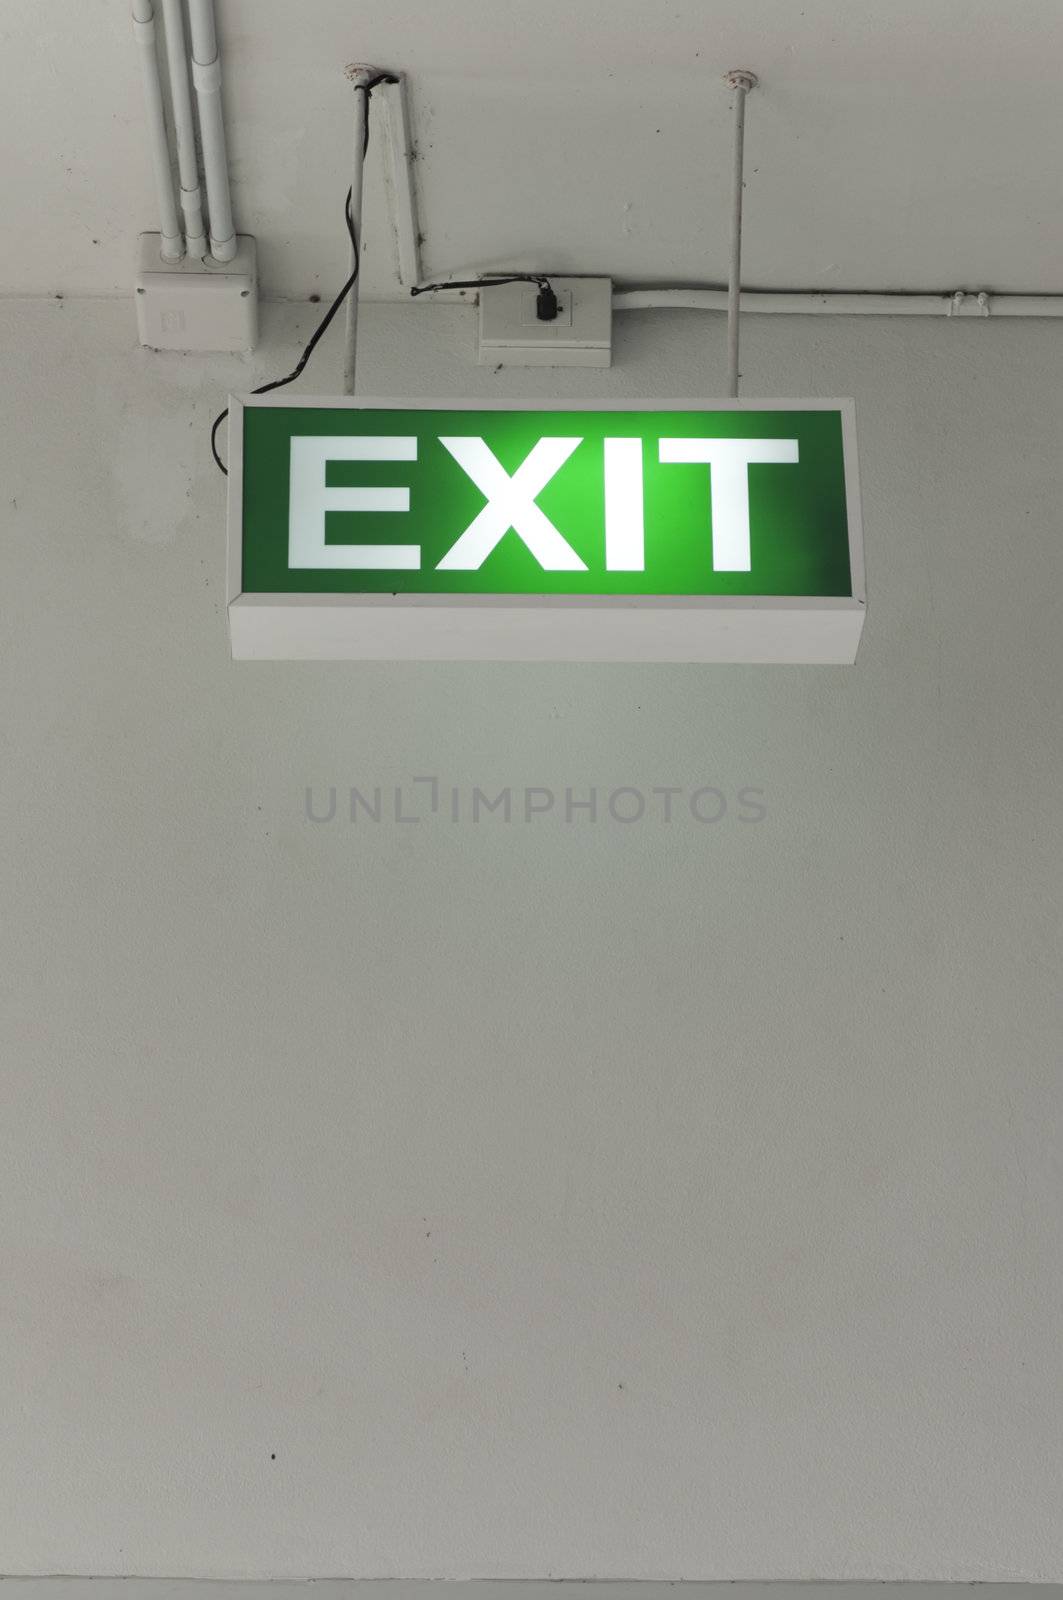 Emergency exit sign by TanawatPontchour